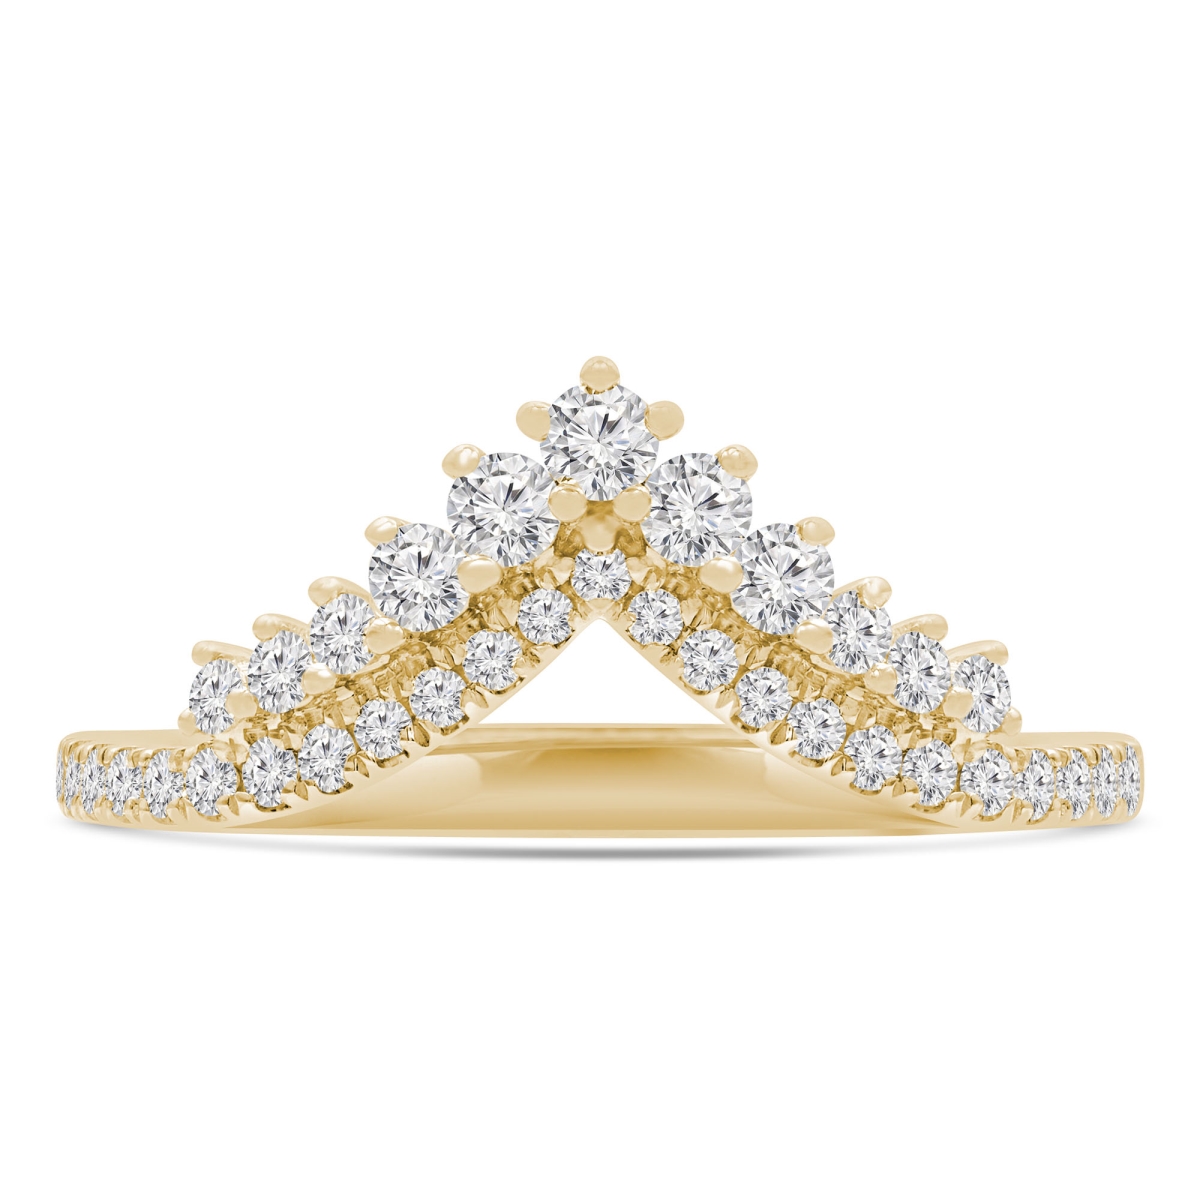 MDR220215-4.5 0.38 CTW Round Diamond Two-Row Tiara Shared Prong Semi-Eternity Anniversary Wedding Band Ring in 14K Yellow Gold - Size 4.5 -  Majesty Diamonds